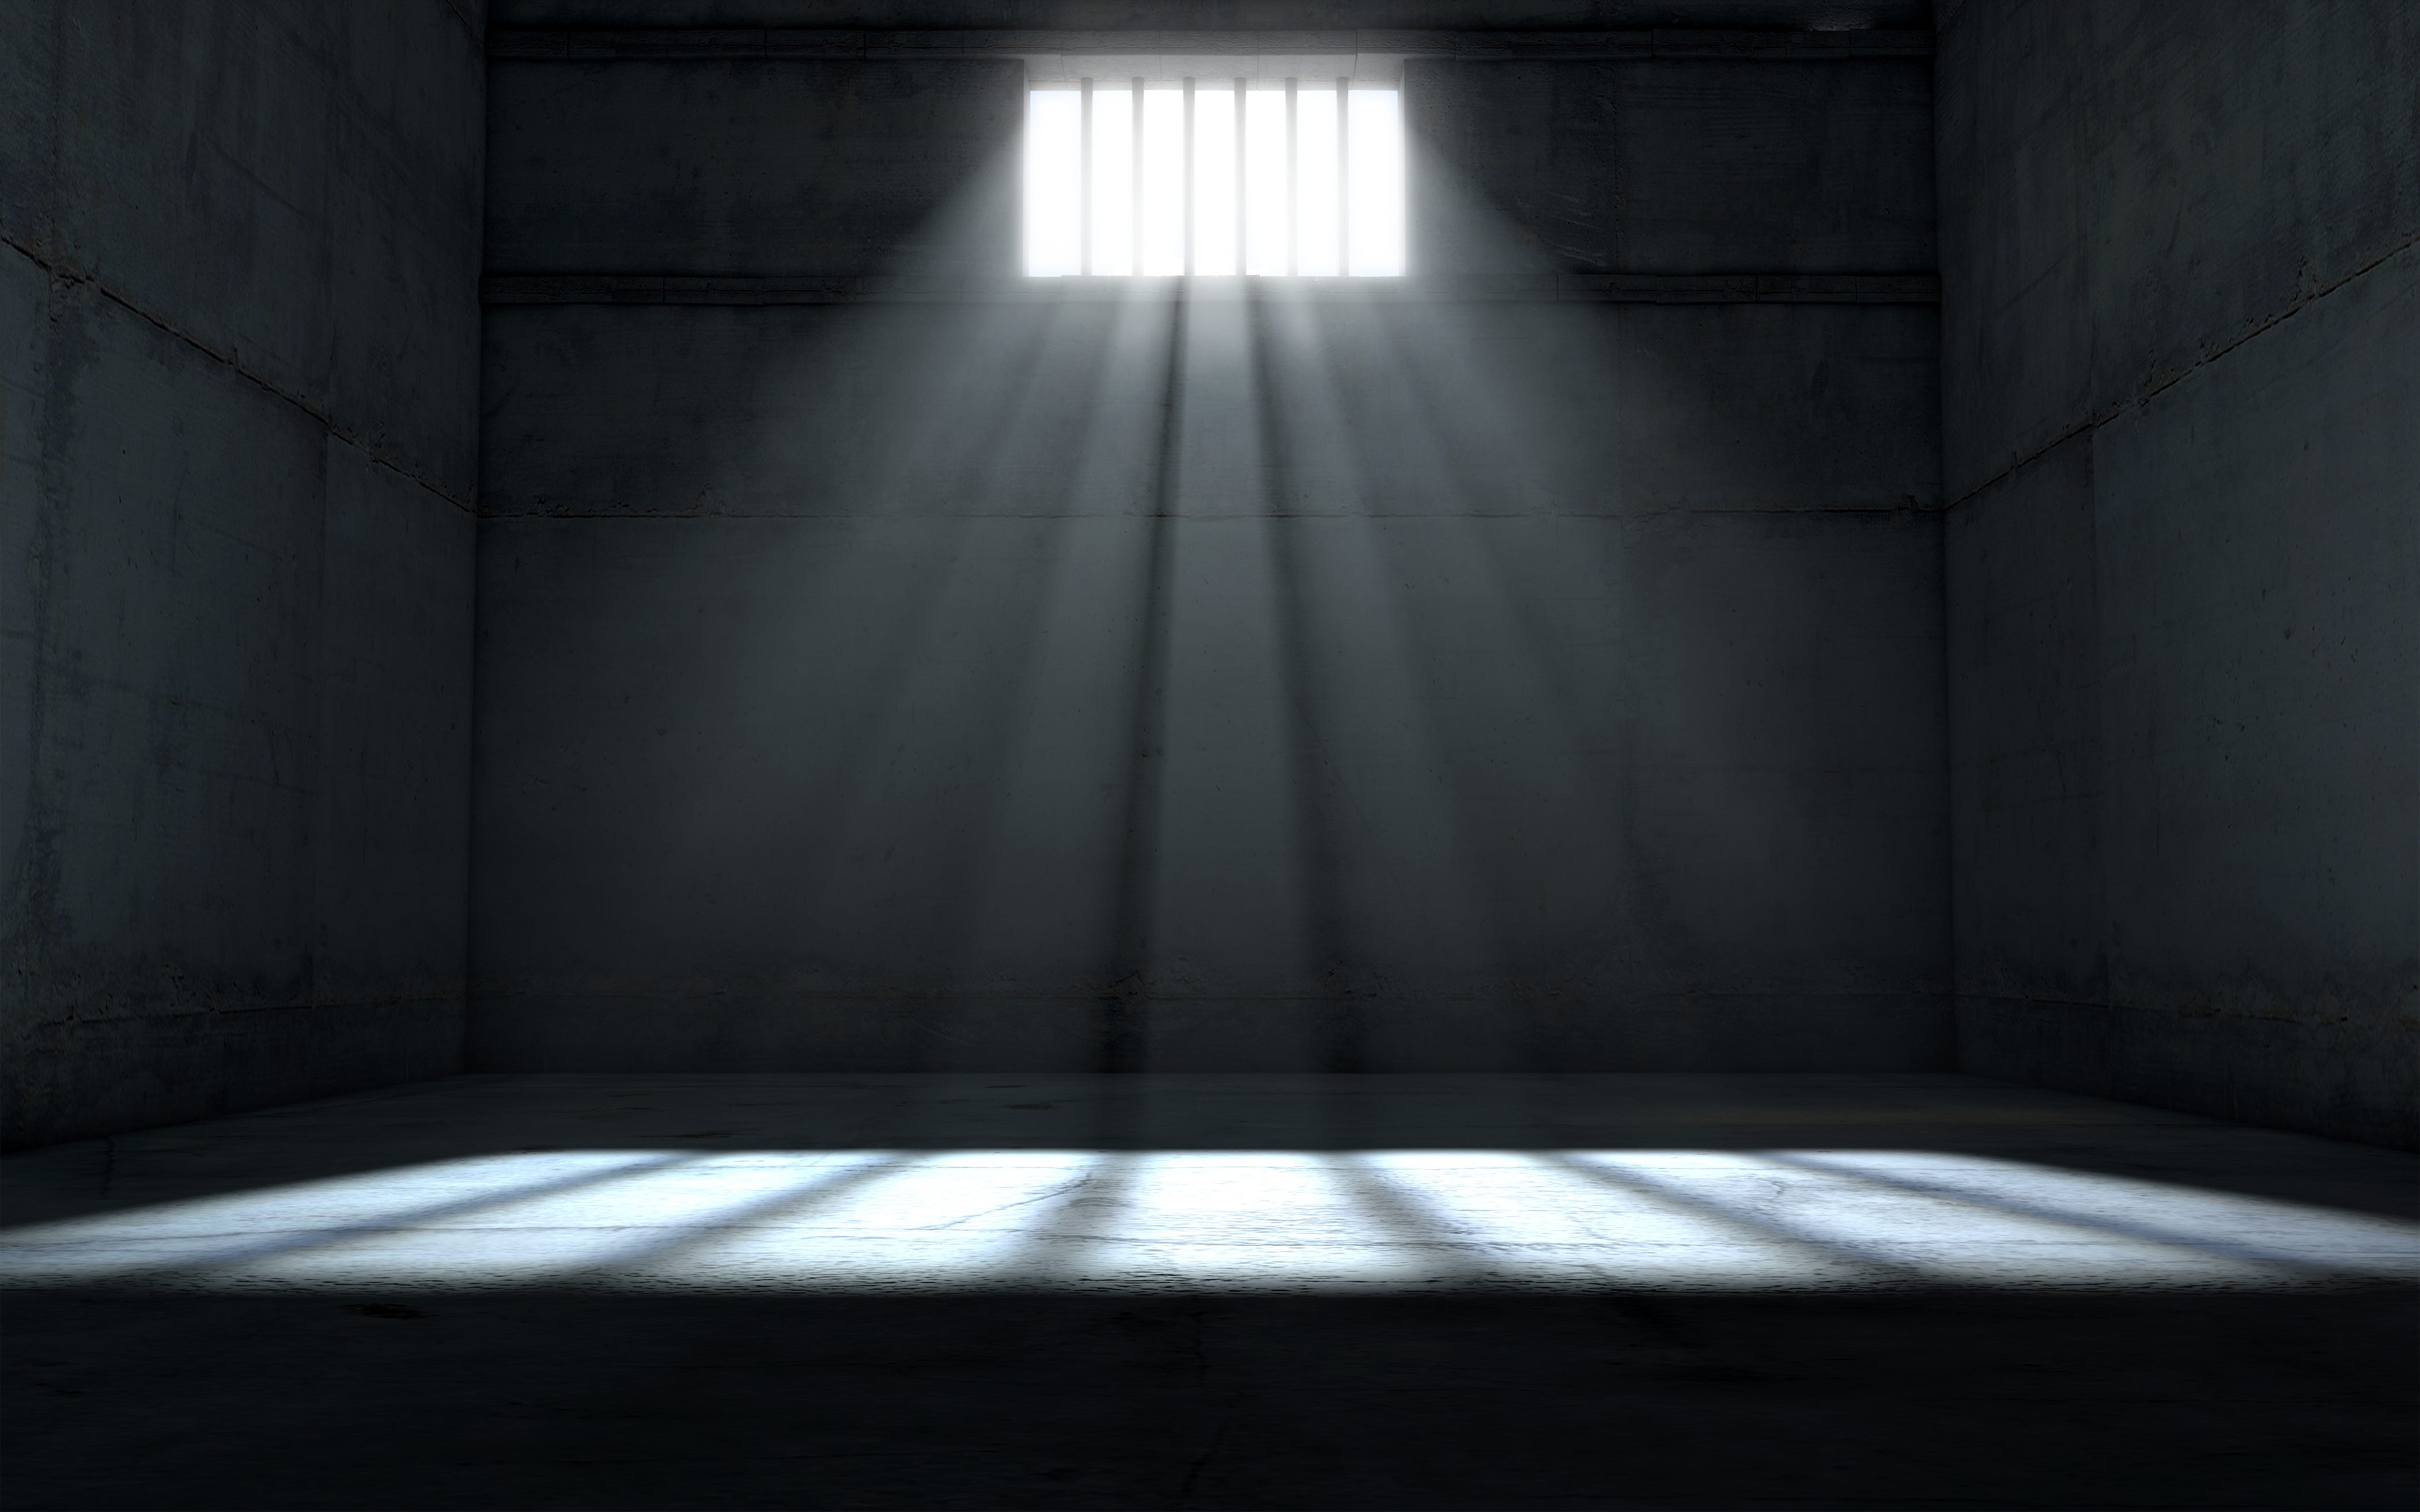 Looking Out the Prison Window - Redemption Chronicle - Medium